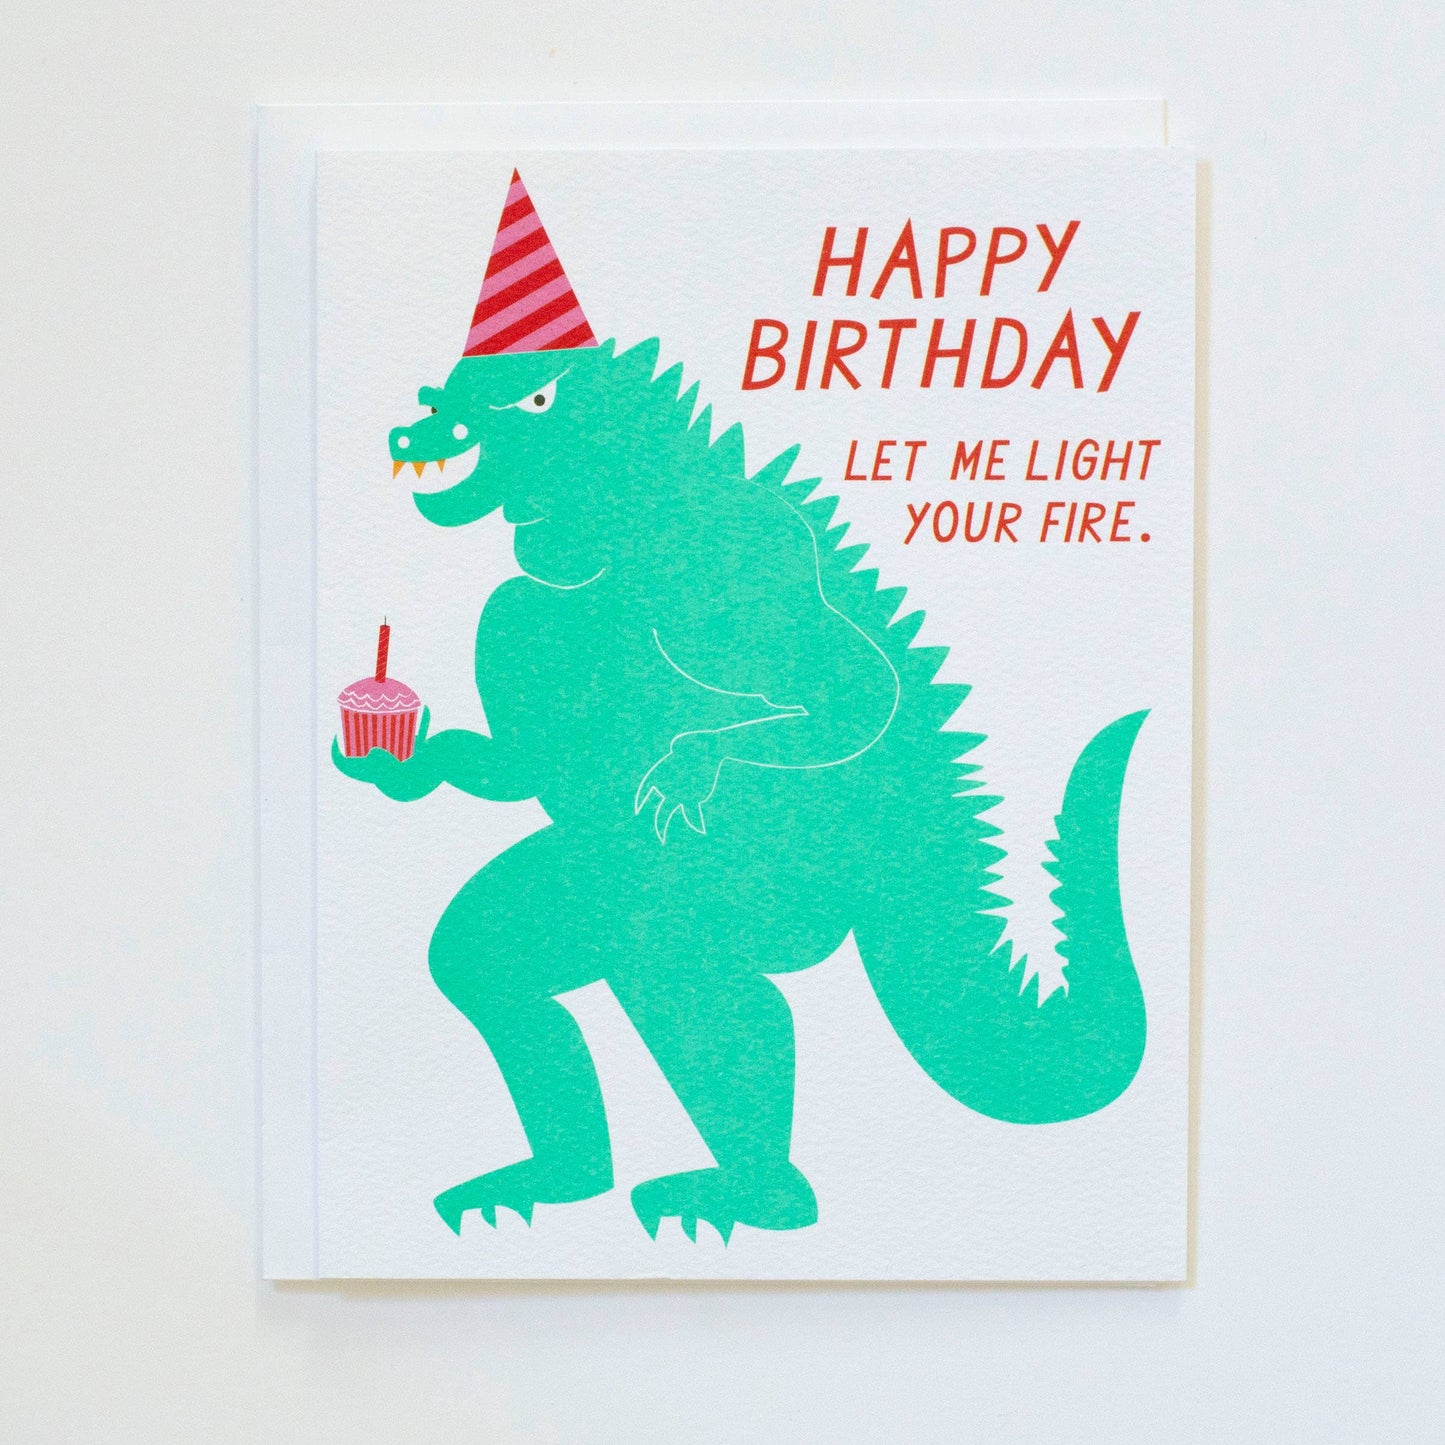 Happy Birthday - Let me Light Your Fire - Note Card